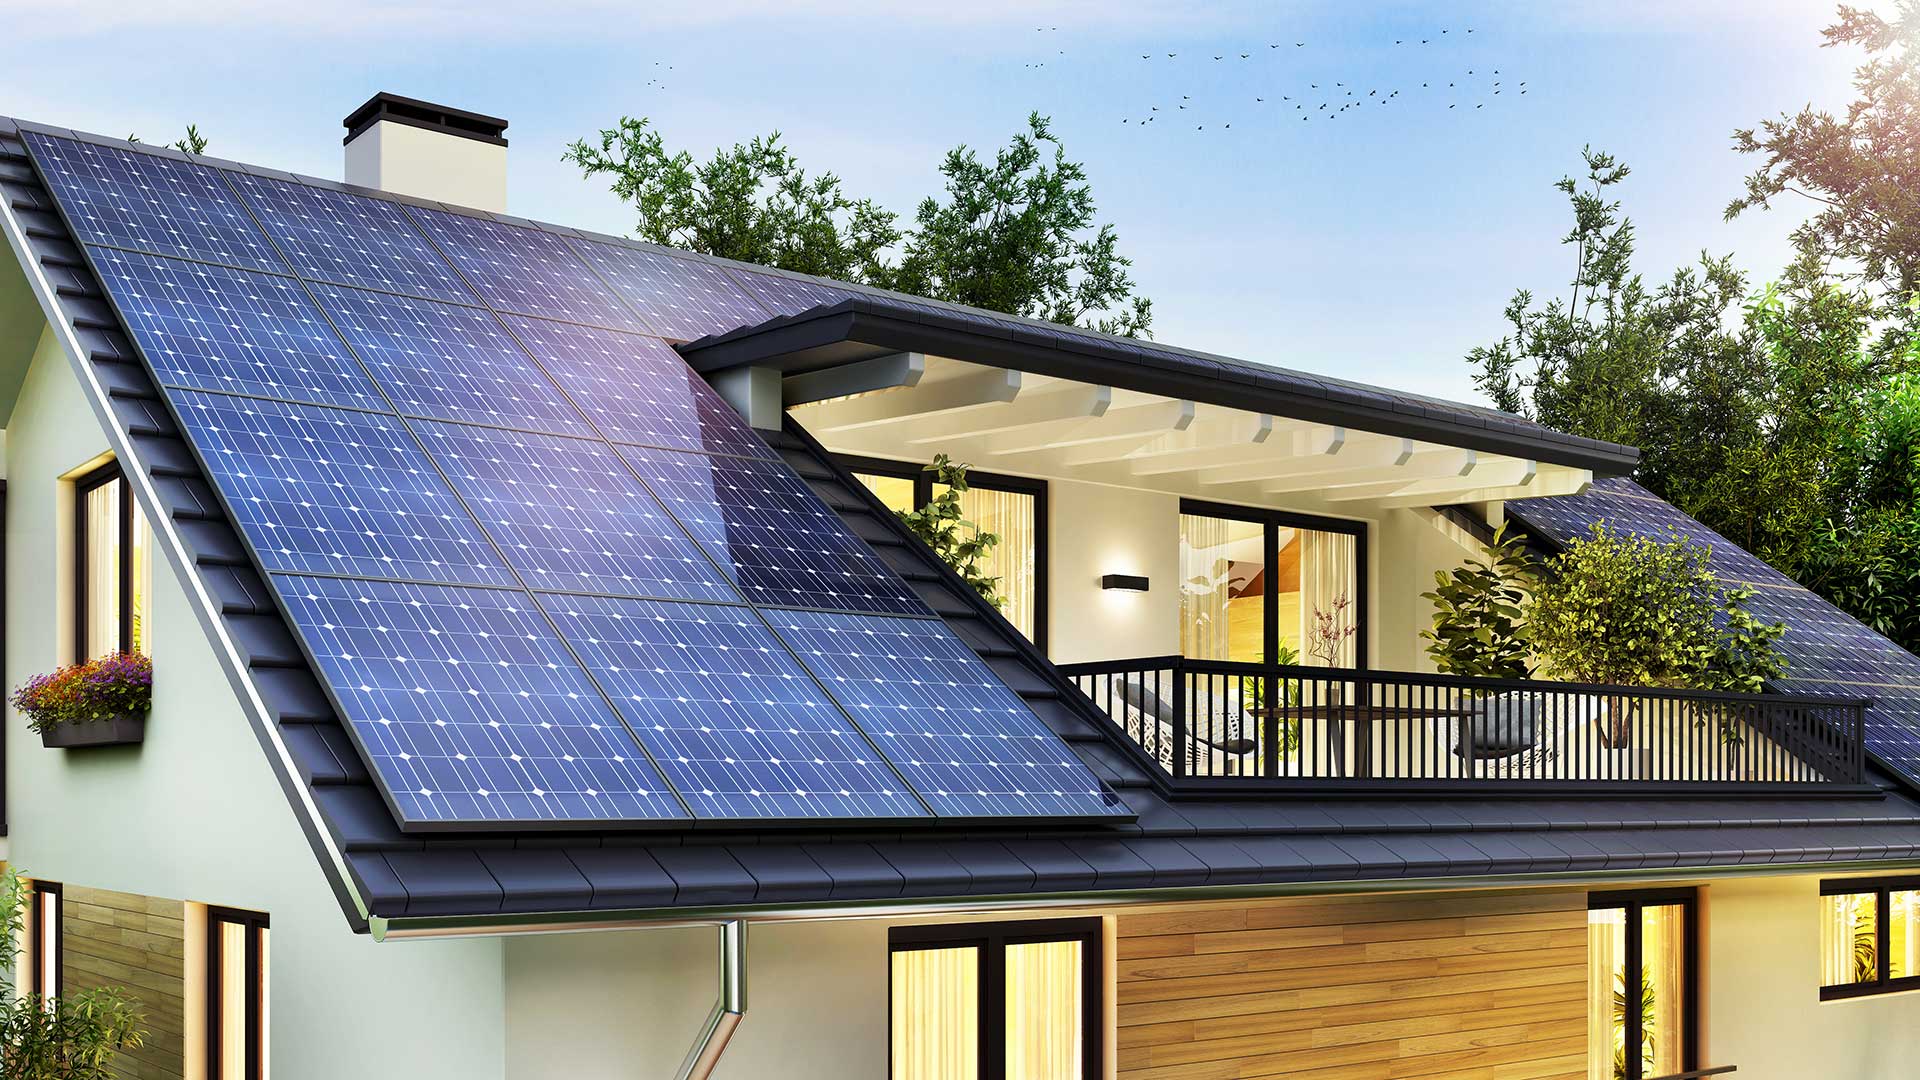 Solar panels on two-story home